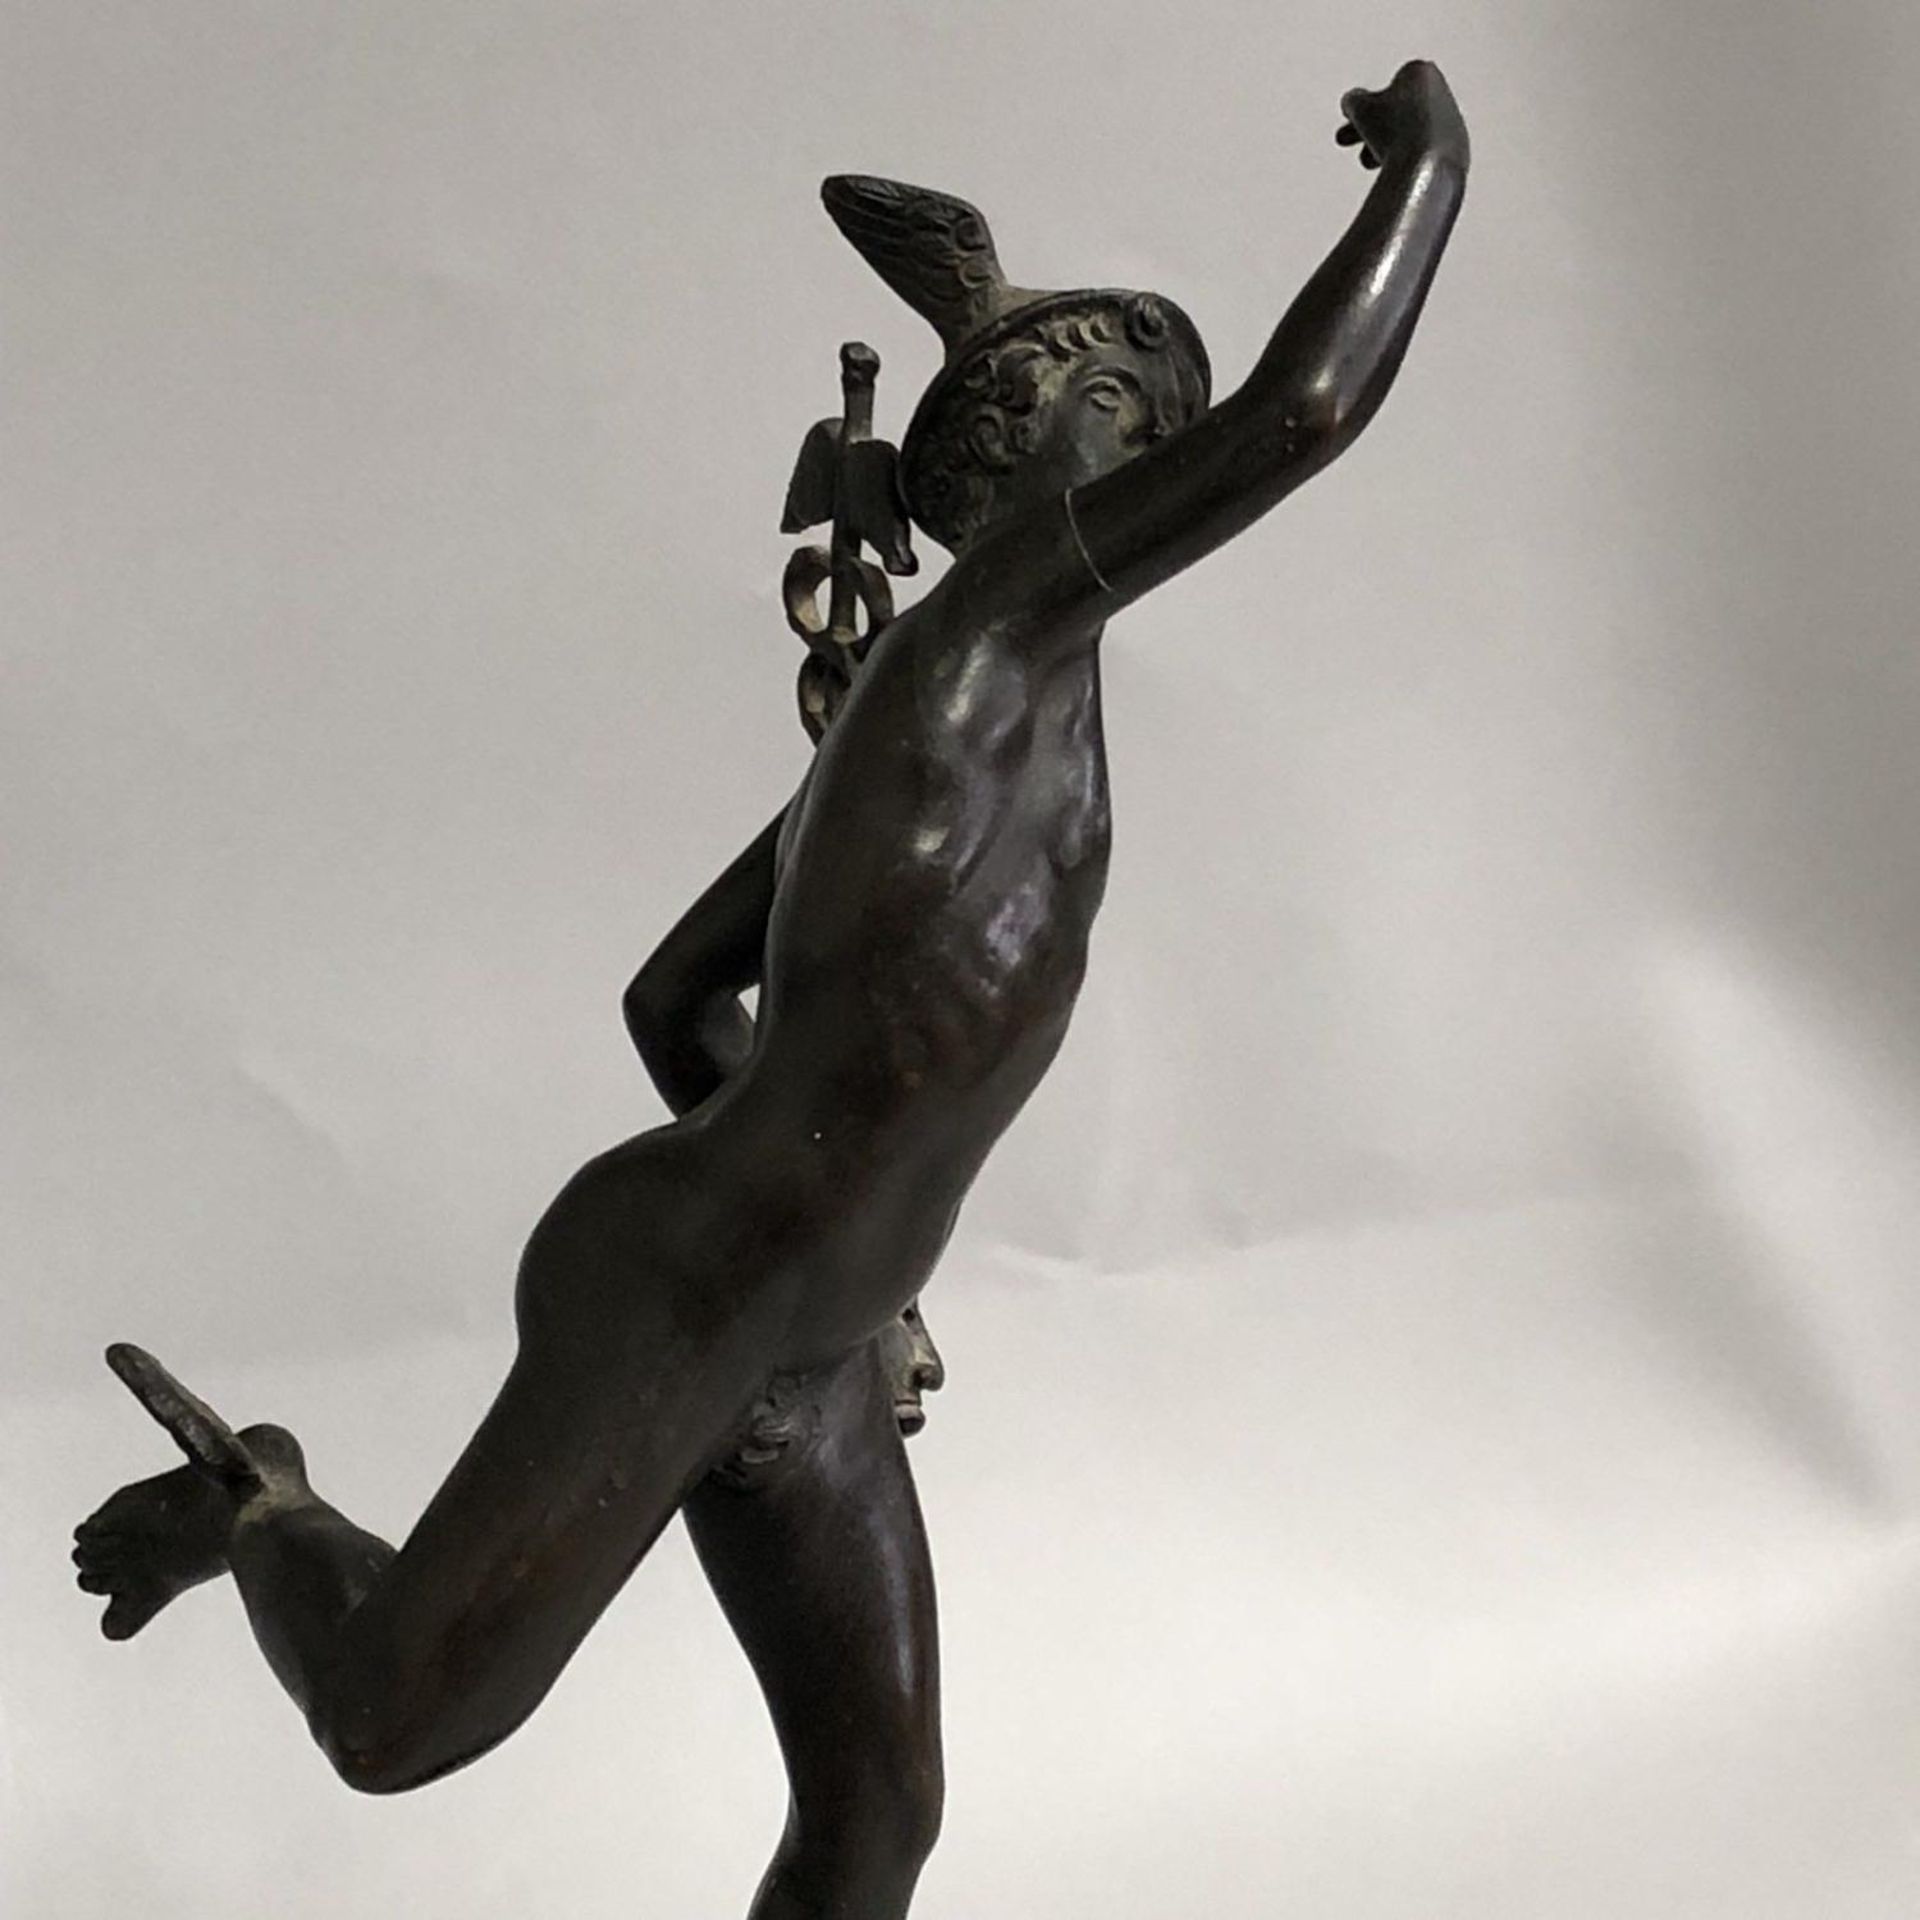 Bronzed Metal Figure of Winged Flying Mercury on Marble Base (after Bologna) - Image 5 of 6